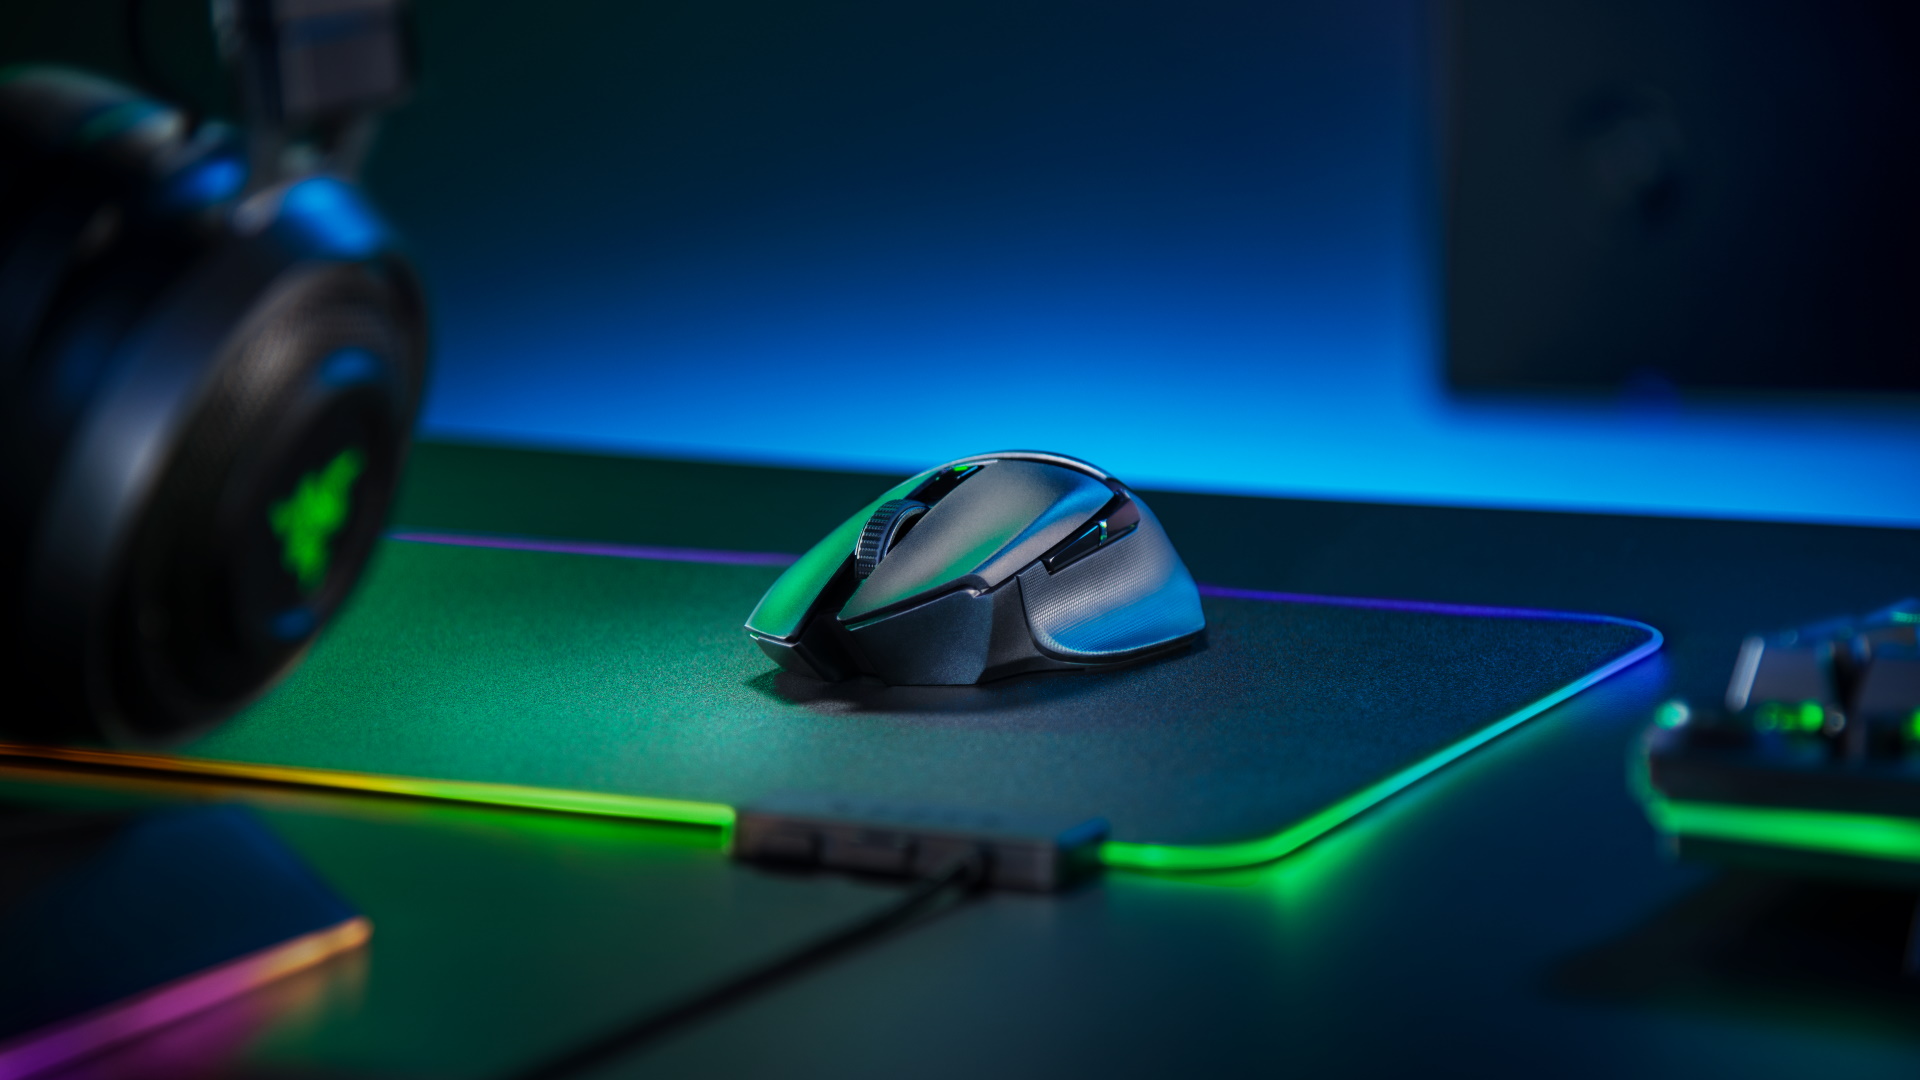 Best wireless gaming mouse in 2022